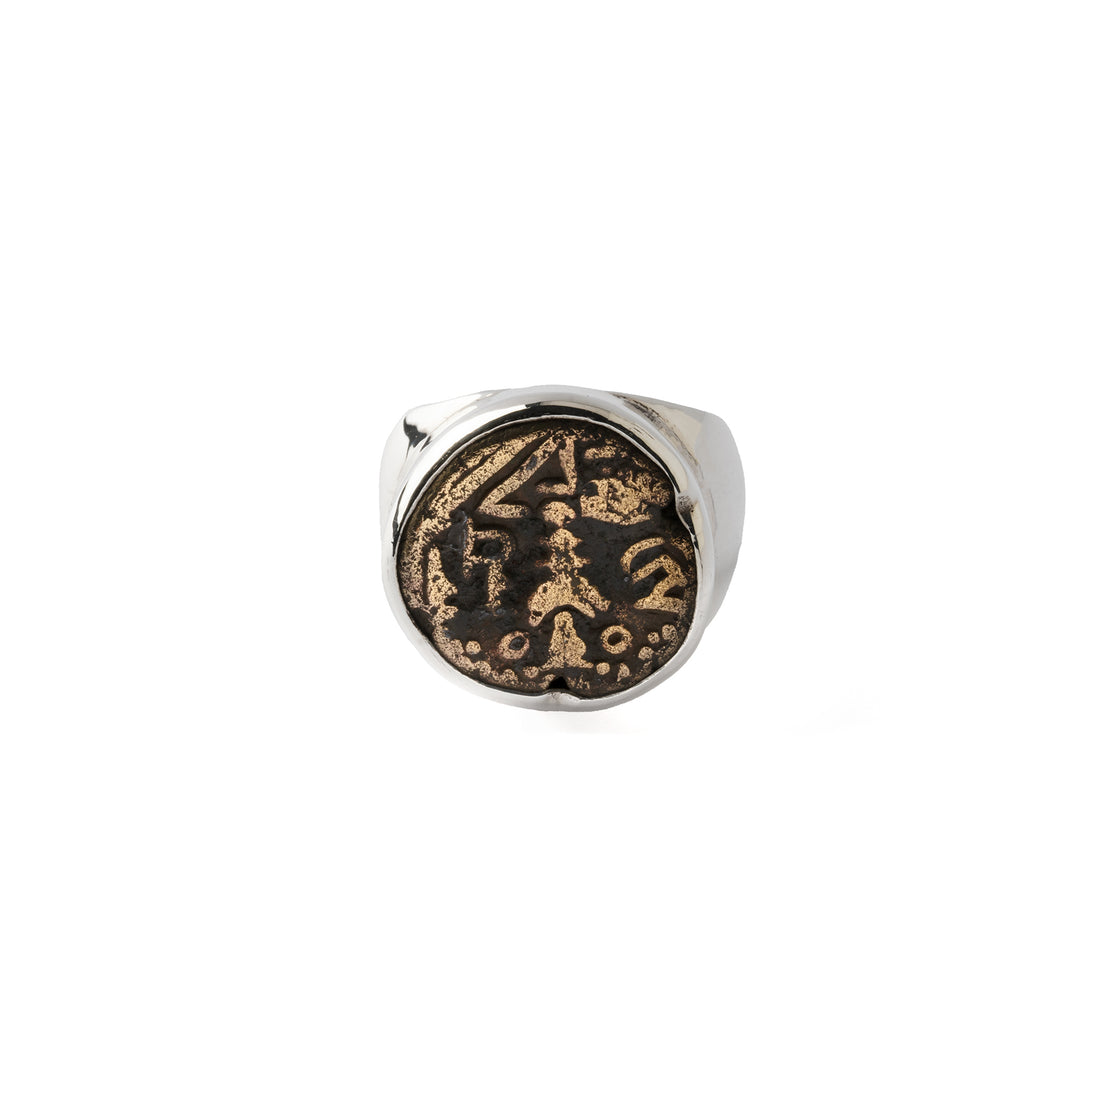 Dida Rani Coin set in Silver Ring